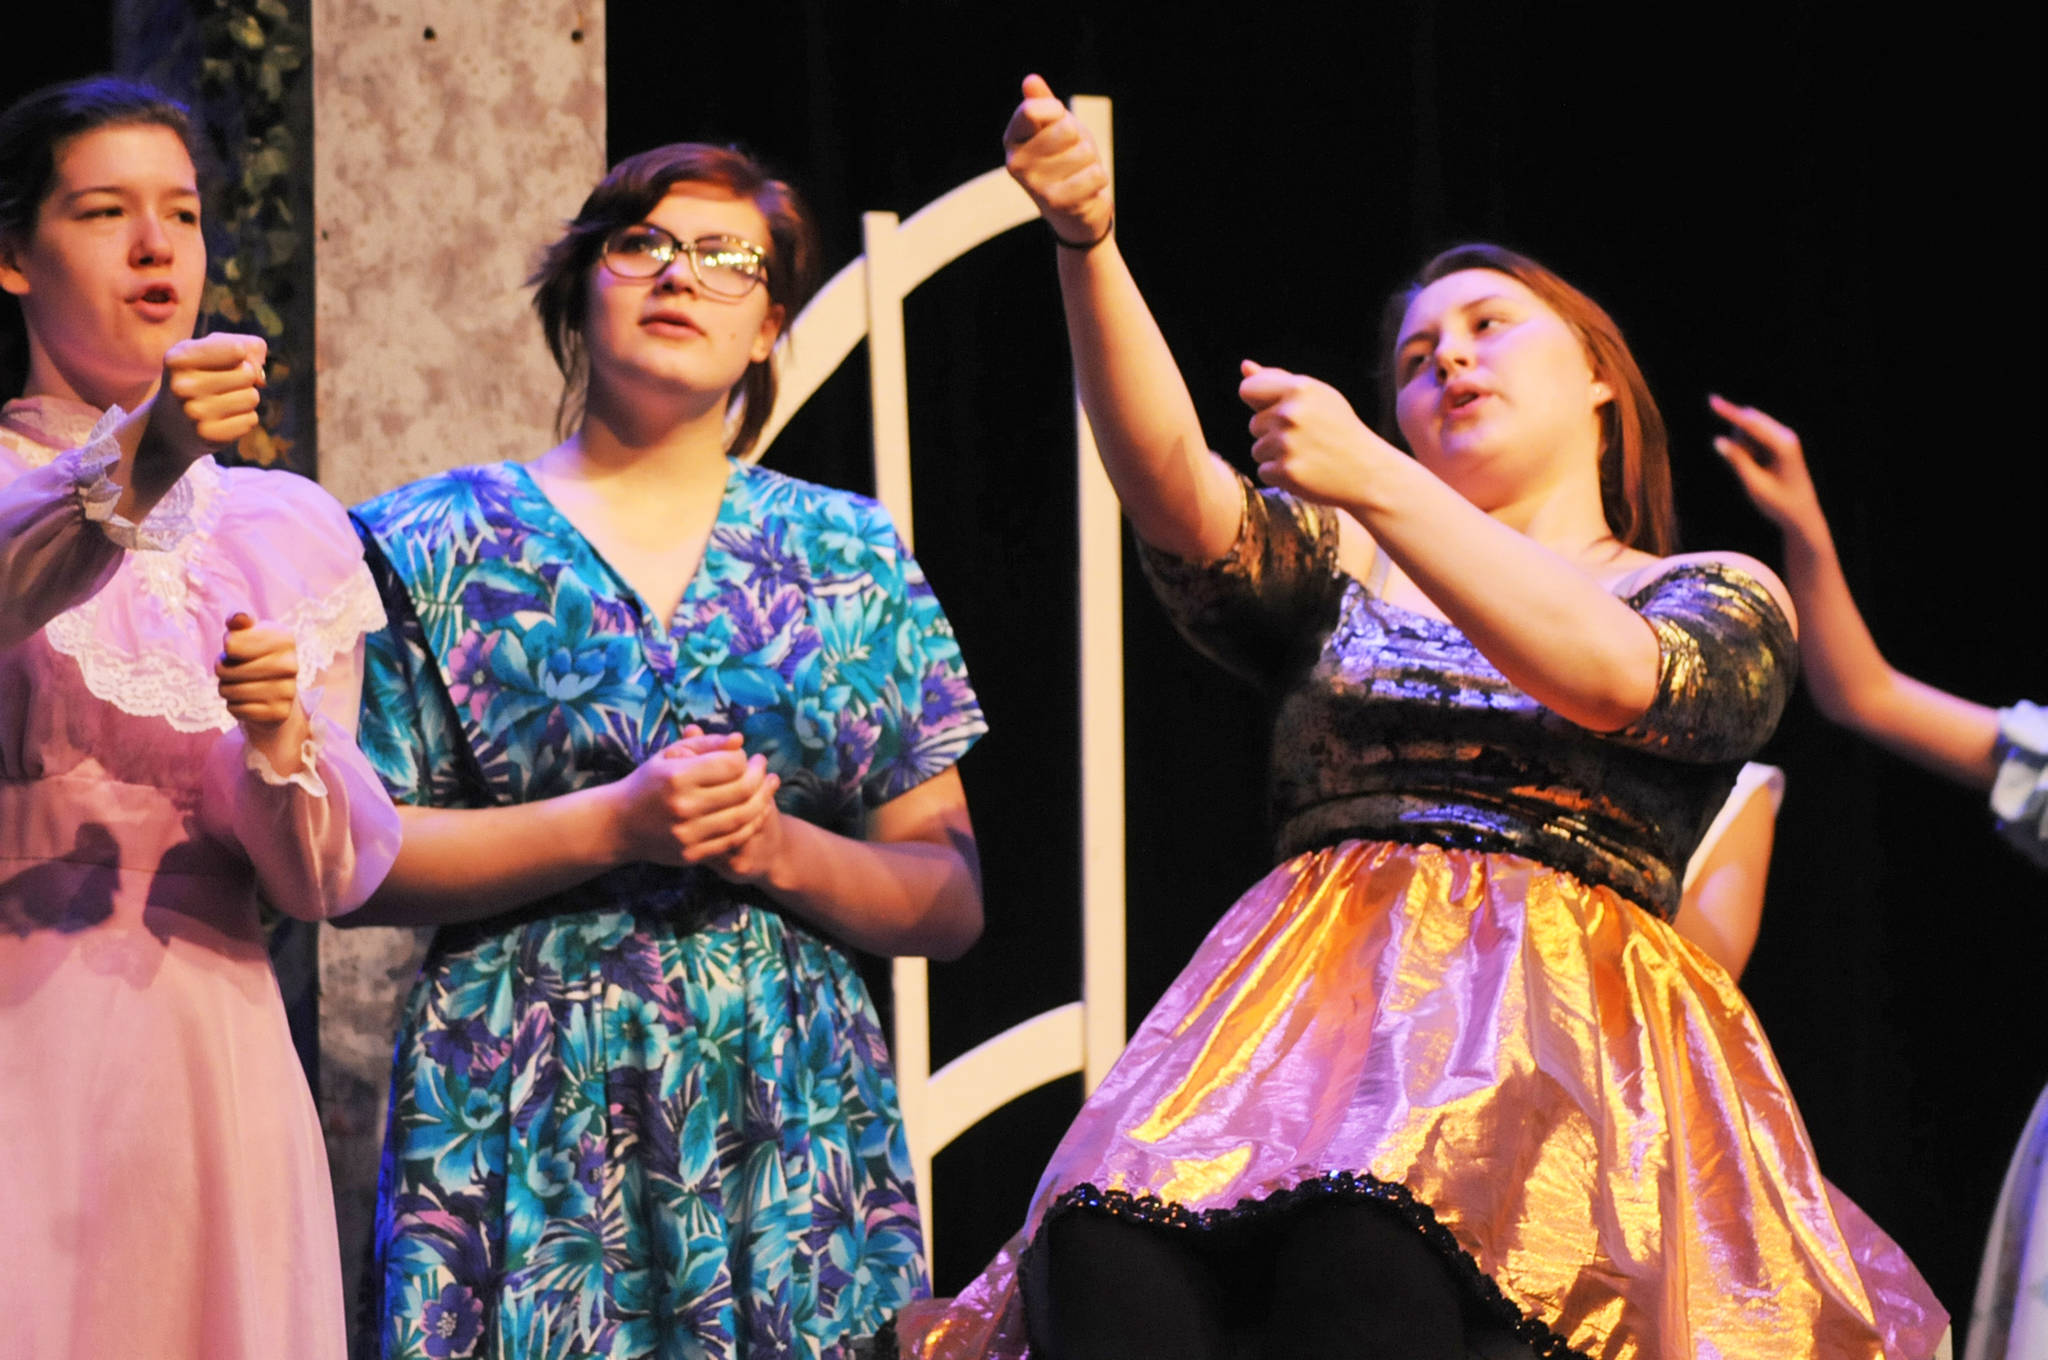 Actors sing a number during a dress rehearsal for Nikiski Middle-High School’s production of “Mary Poppins” on Monday, April 23, 2018 in Nikiski, Alaska. The play premiers Friday at 7 p.m. at the high school. Tickets are $15. (Photo by Elizabeth Earl/Peninsula Clarion)